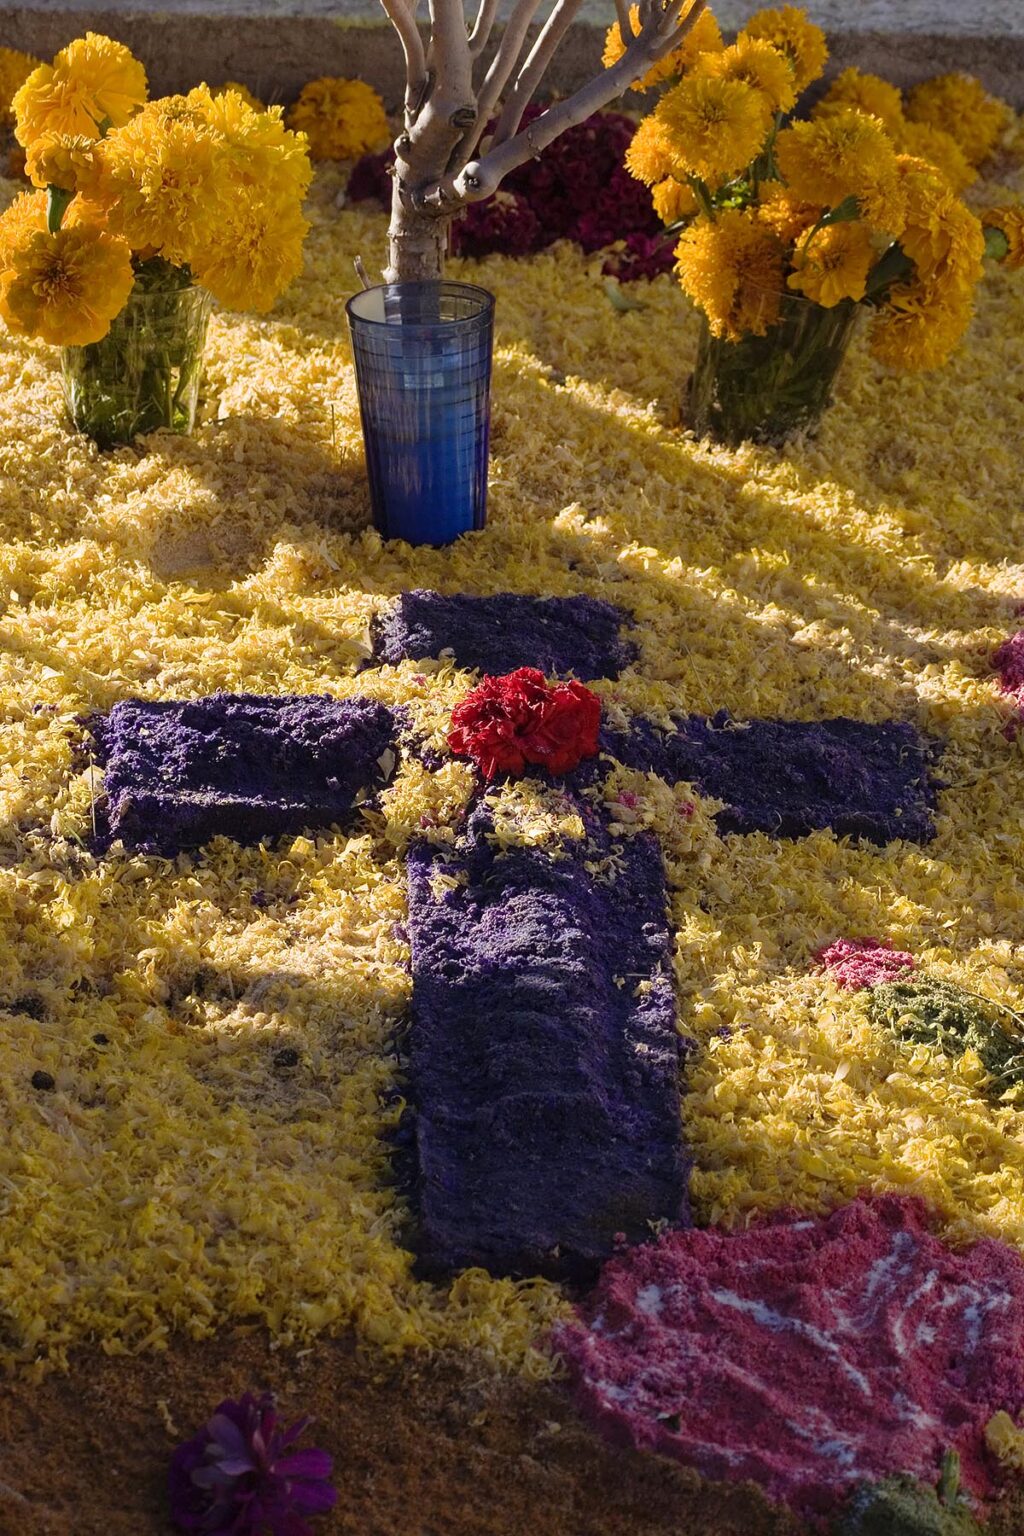 A FLOWER covered grave at the local cemetery during the DEAD OF THE DEAD - SAN MIGUEL DE ALLENDE, MEXICO